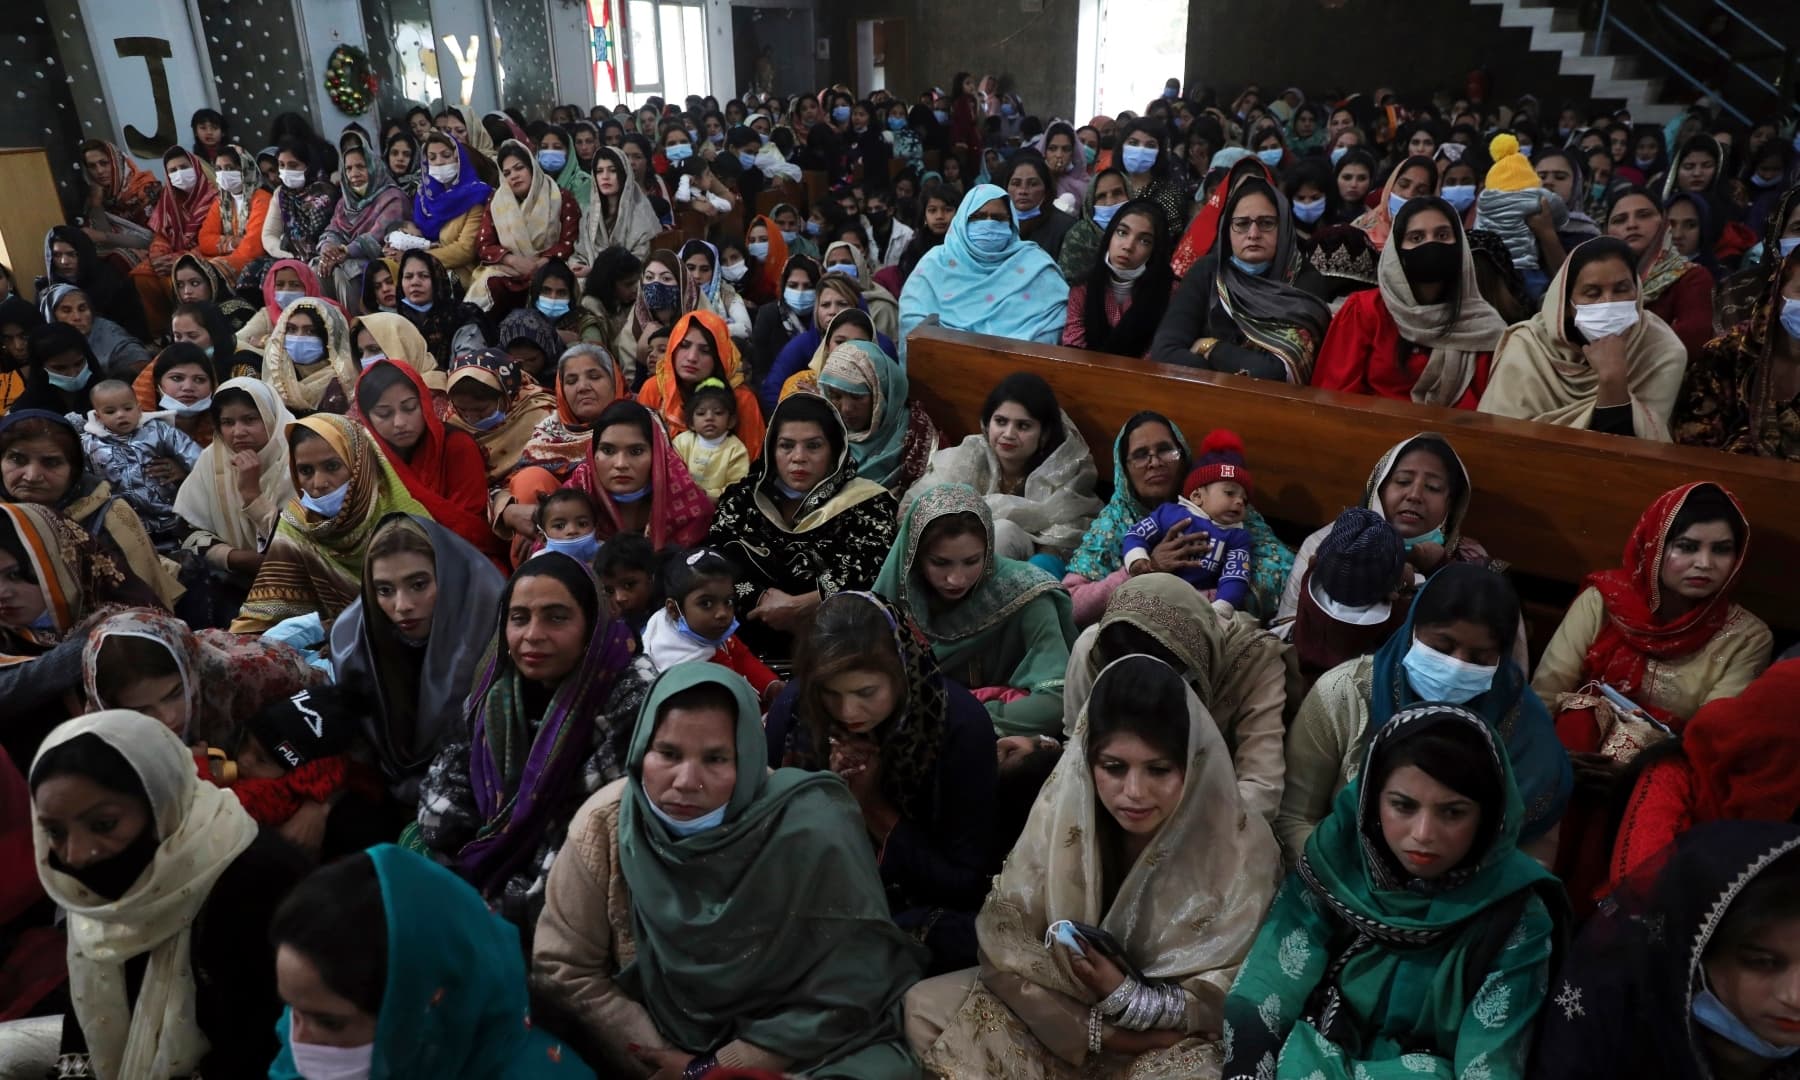 People attend a Christmas Mass in Our Lady of Fatima Church in Islamabad on December 25, 2021. — AP